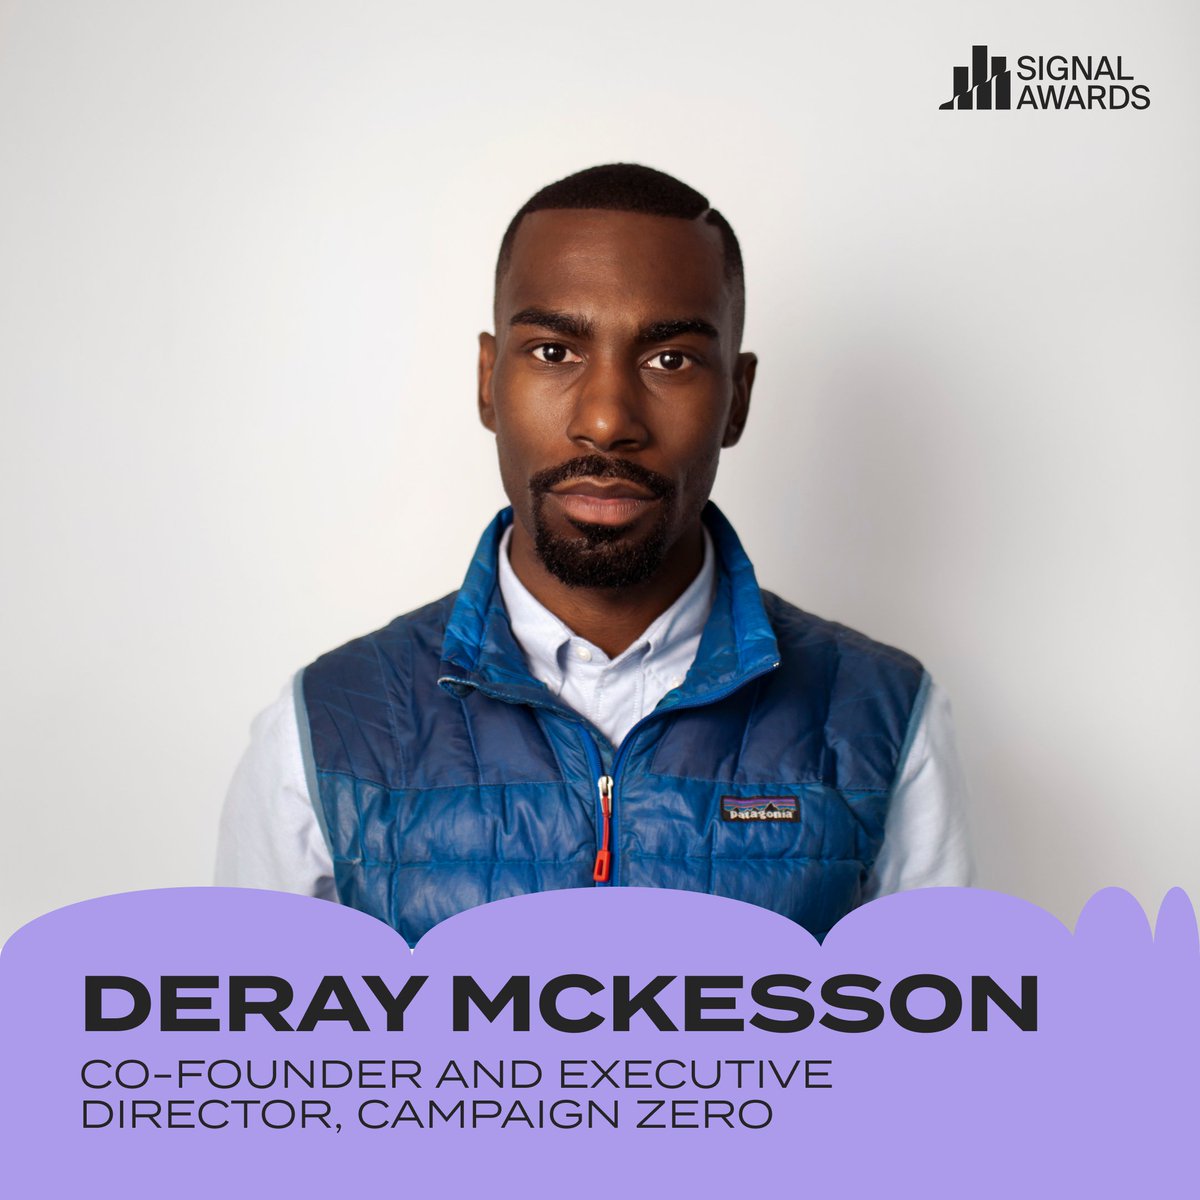 Join us in spotlighting @deray, Co-Founder and Executive Director of @CampaignZero, activist, organizer, and a Signal Awards judge! 🎧 Learn more about our incredible judges at signalaward.com and enter your podcasts before our Early Entry Deadline on May 10th!